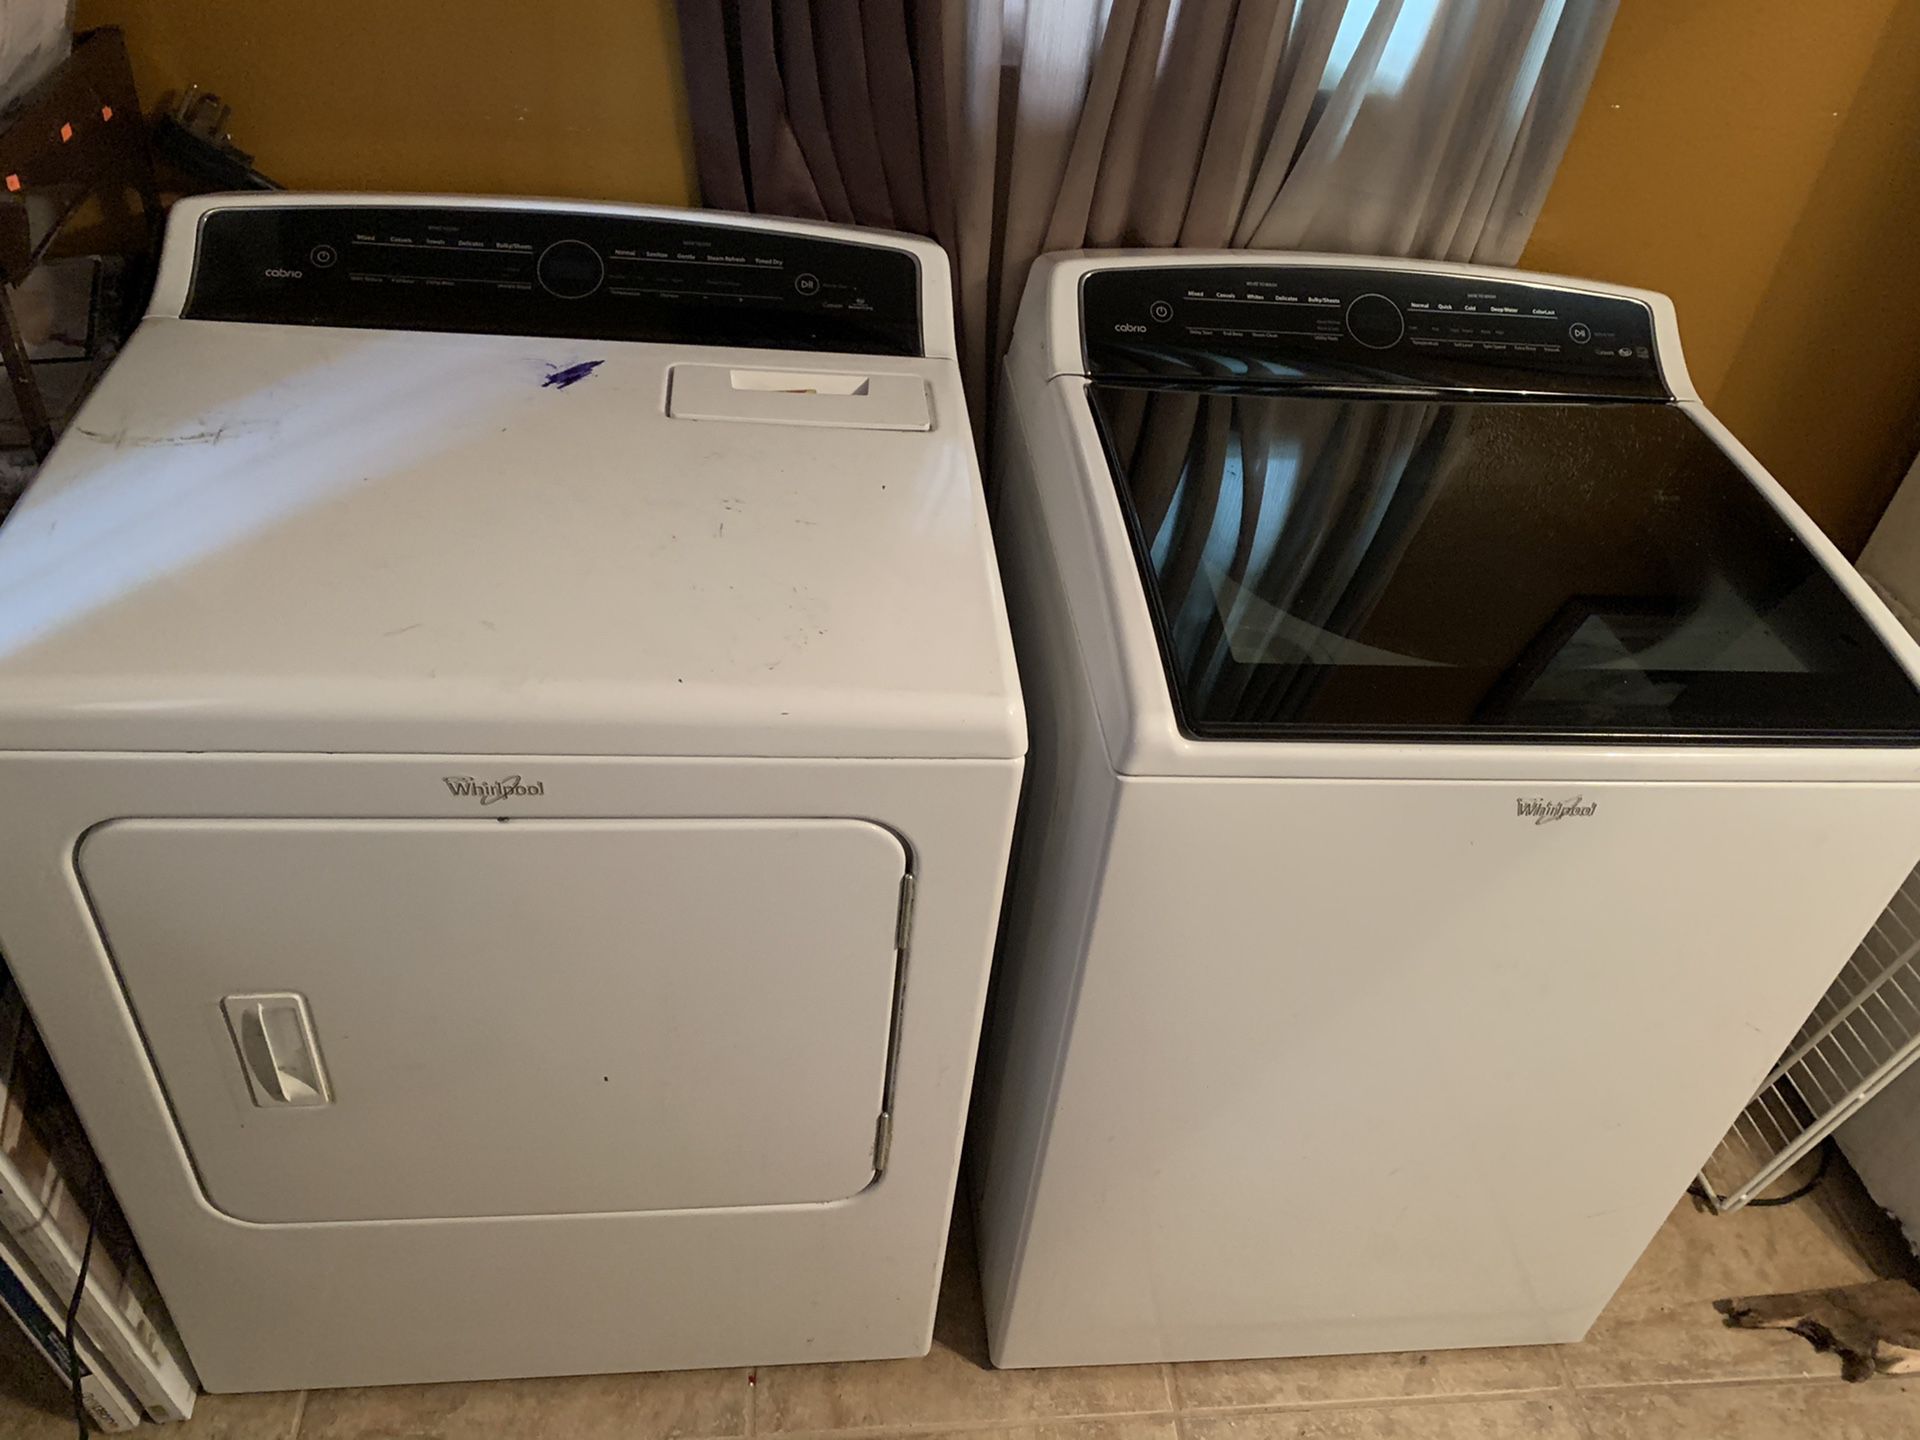 Whirlpool Cabrio washer and dryer